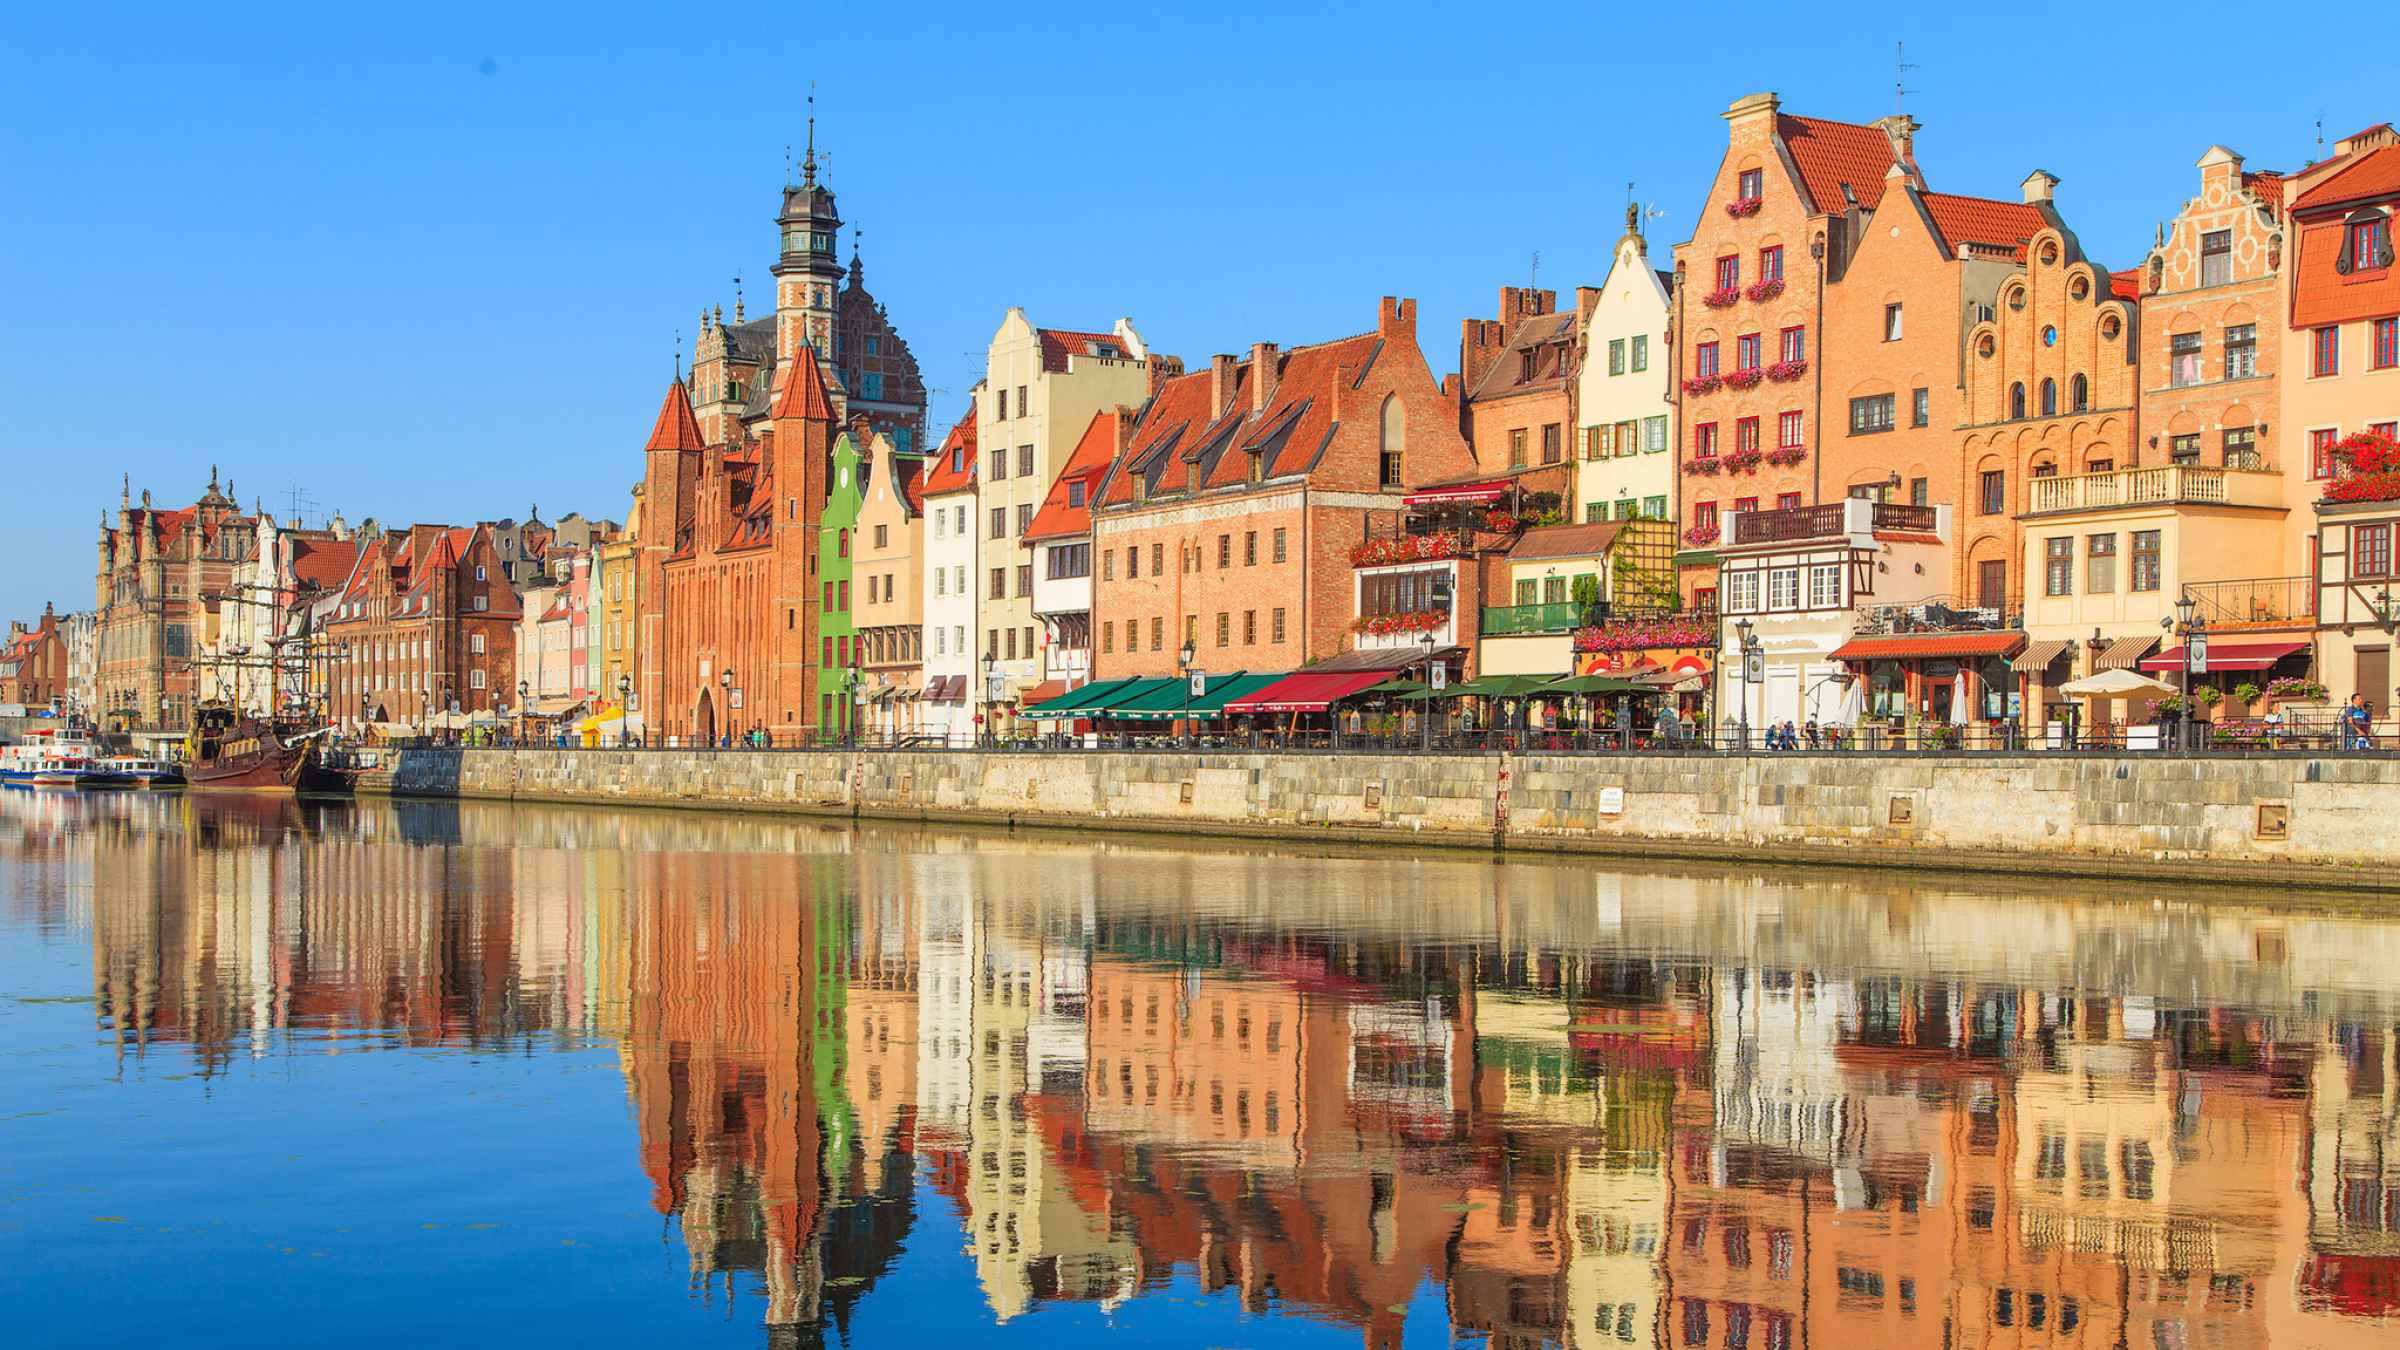 gdansk-2021-top-10-tours-activities-with-photos-things-to-do-in